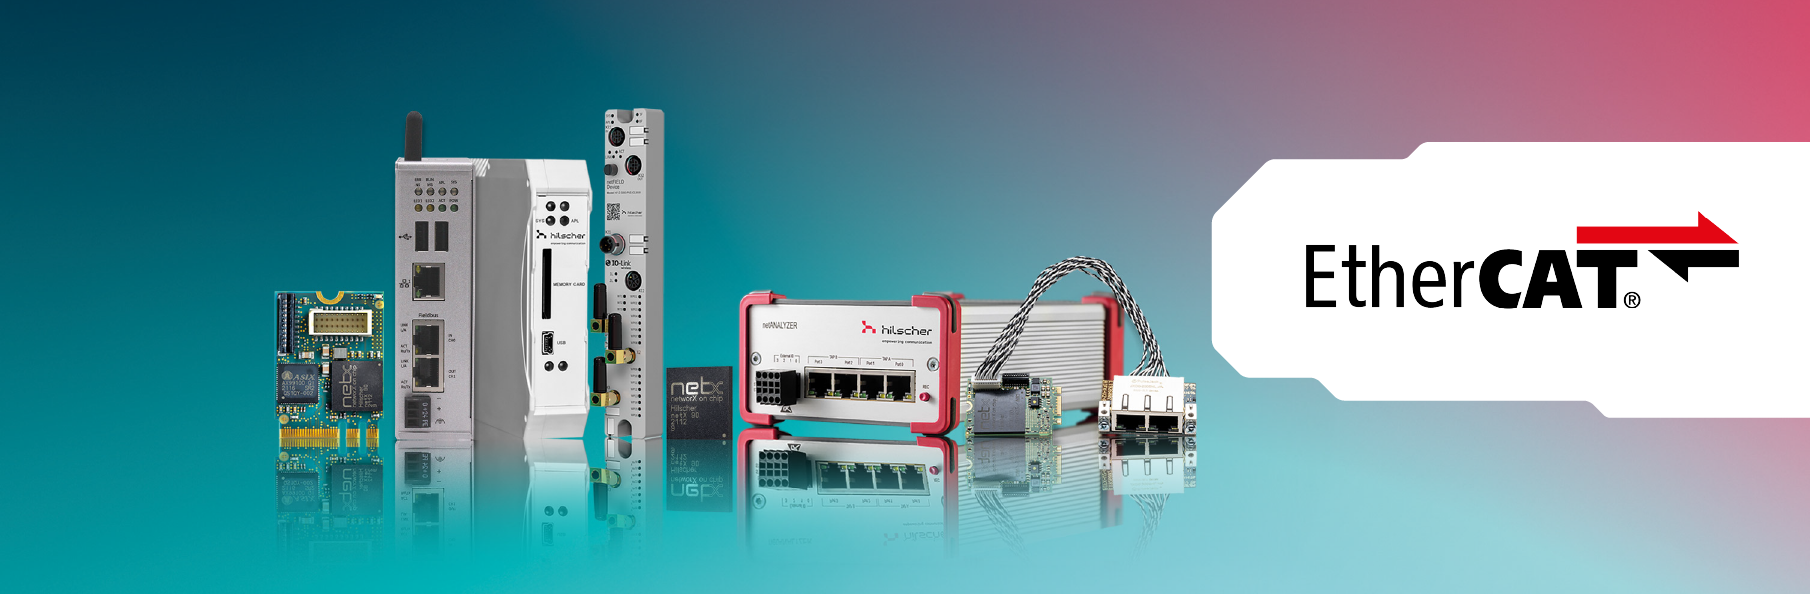 A line of 8 industrial communication products by Hilscher on a blue and red background. On a white area on the right side, there is a EtherCAT logo in black and red.